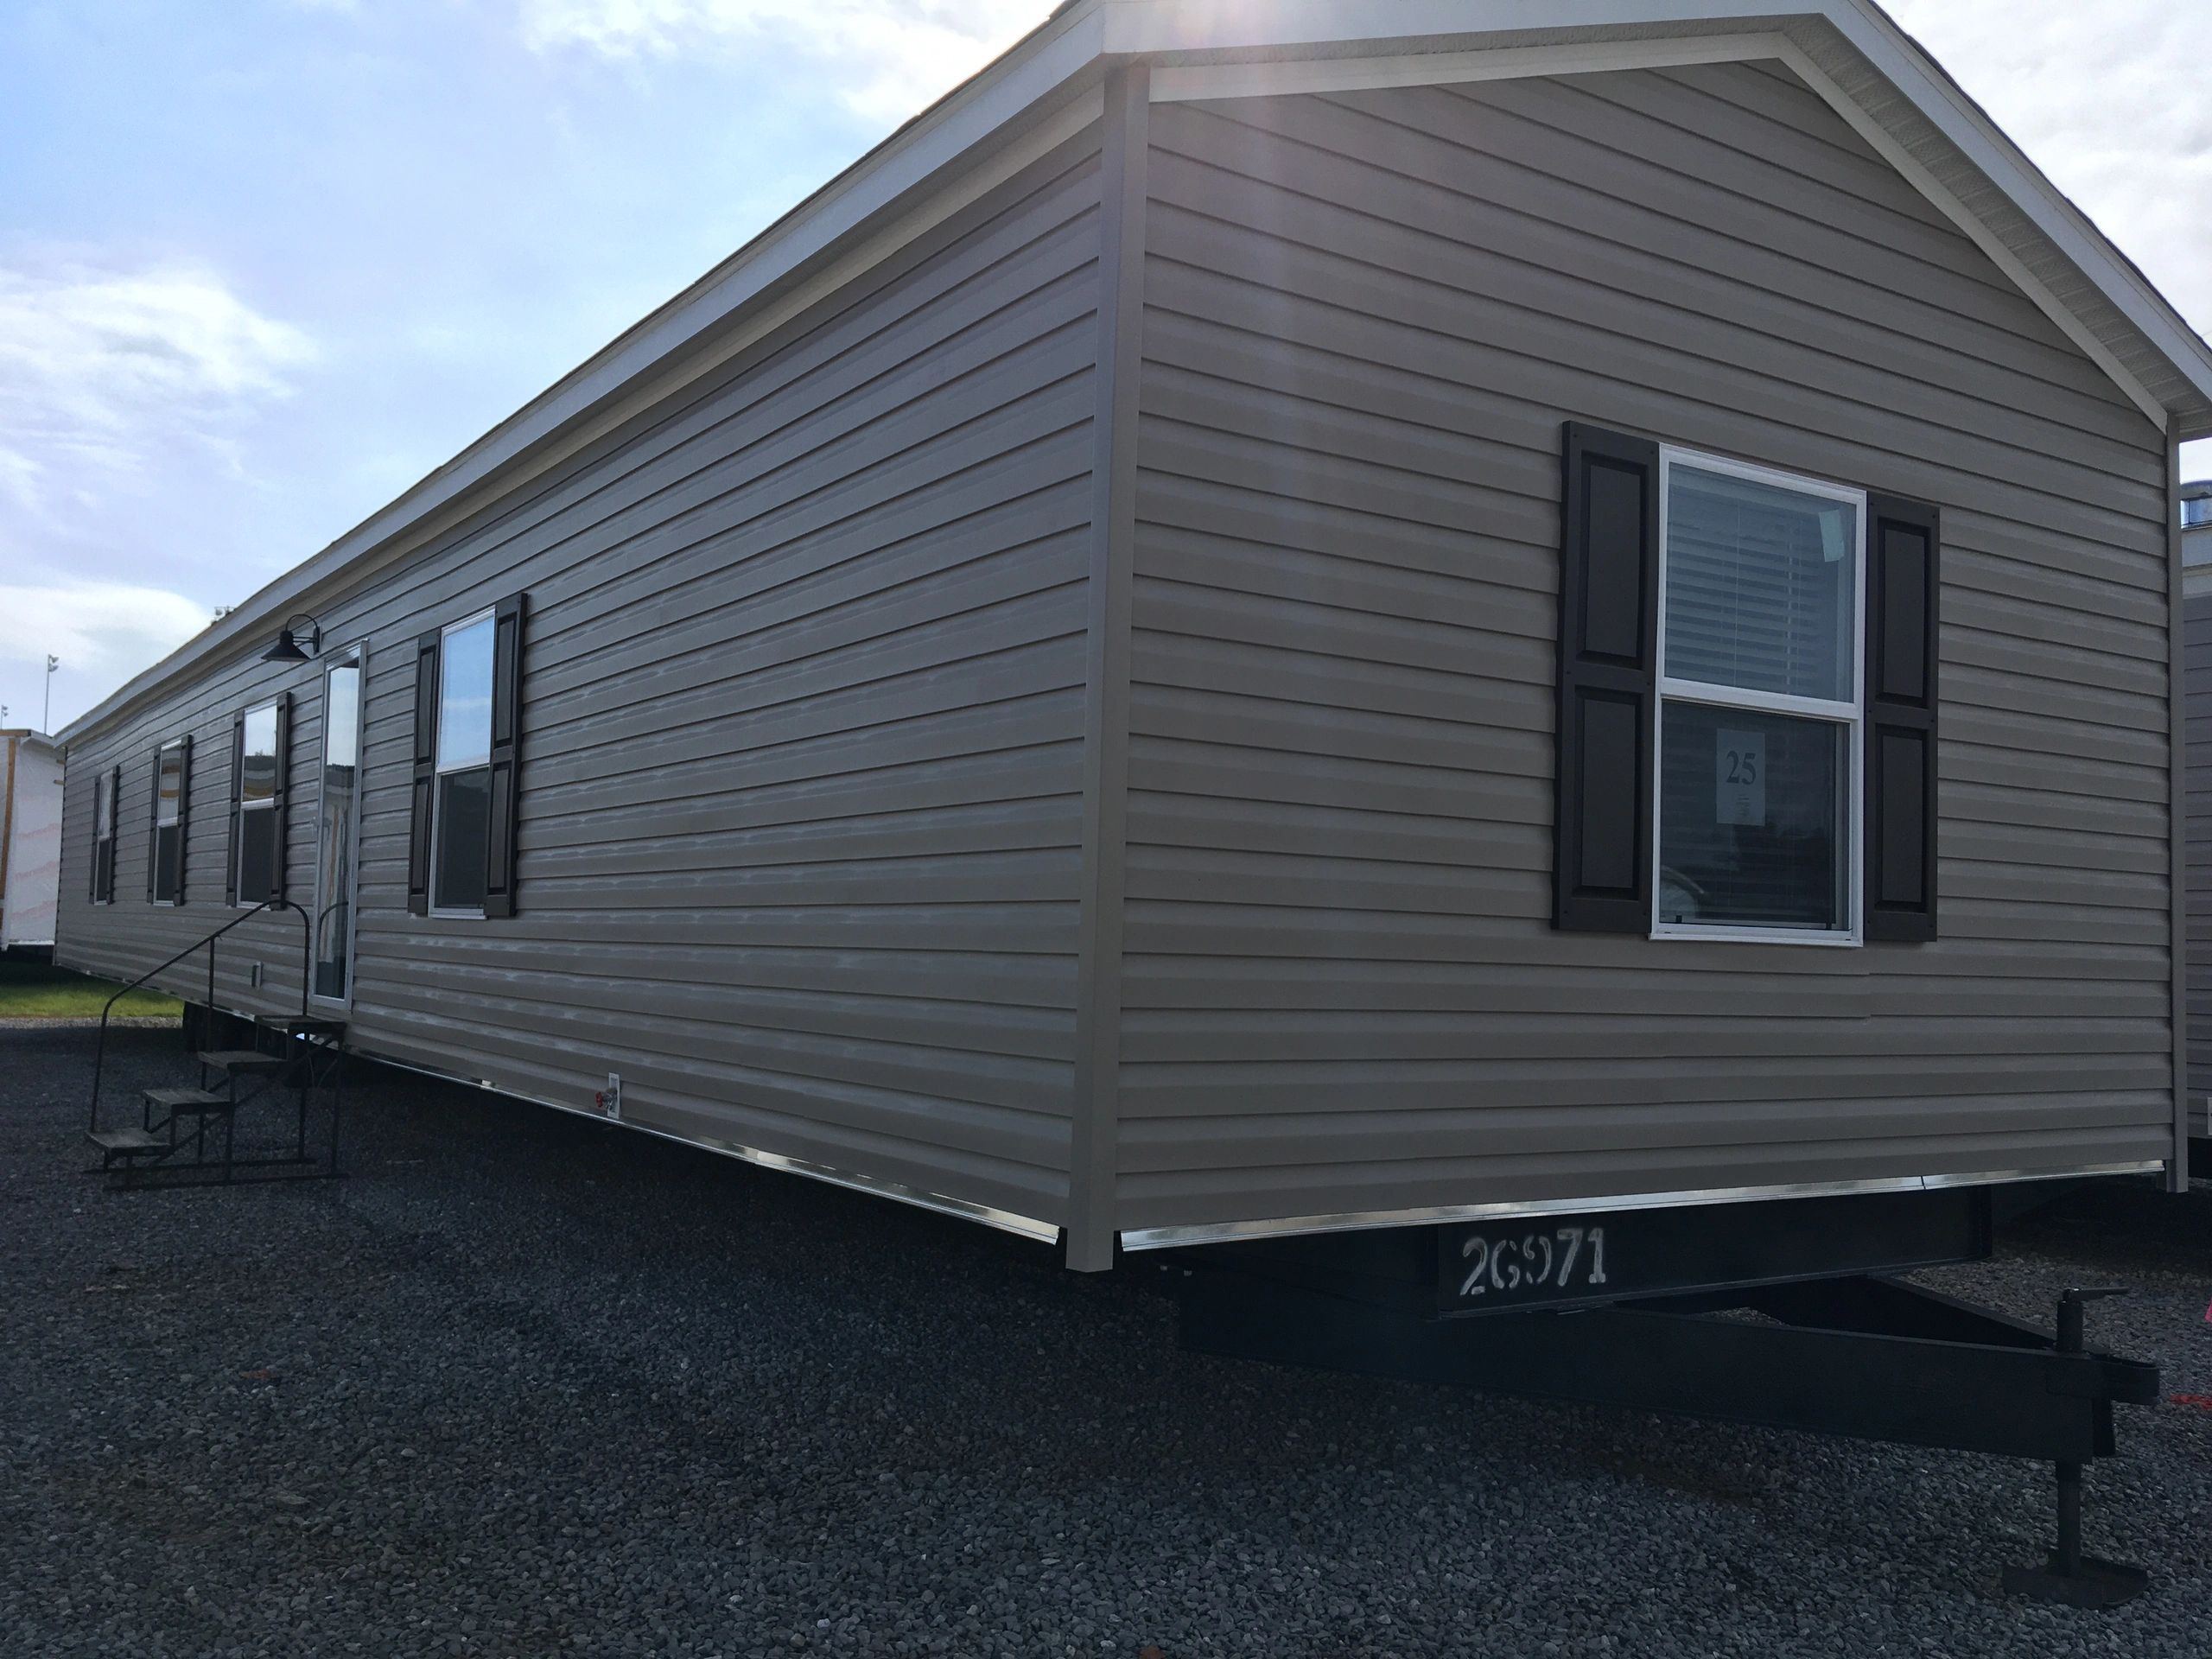 New manufactured home for sale in Alabama.